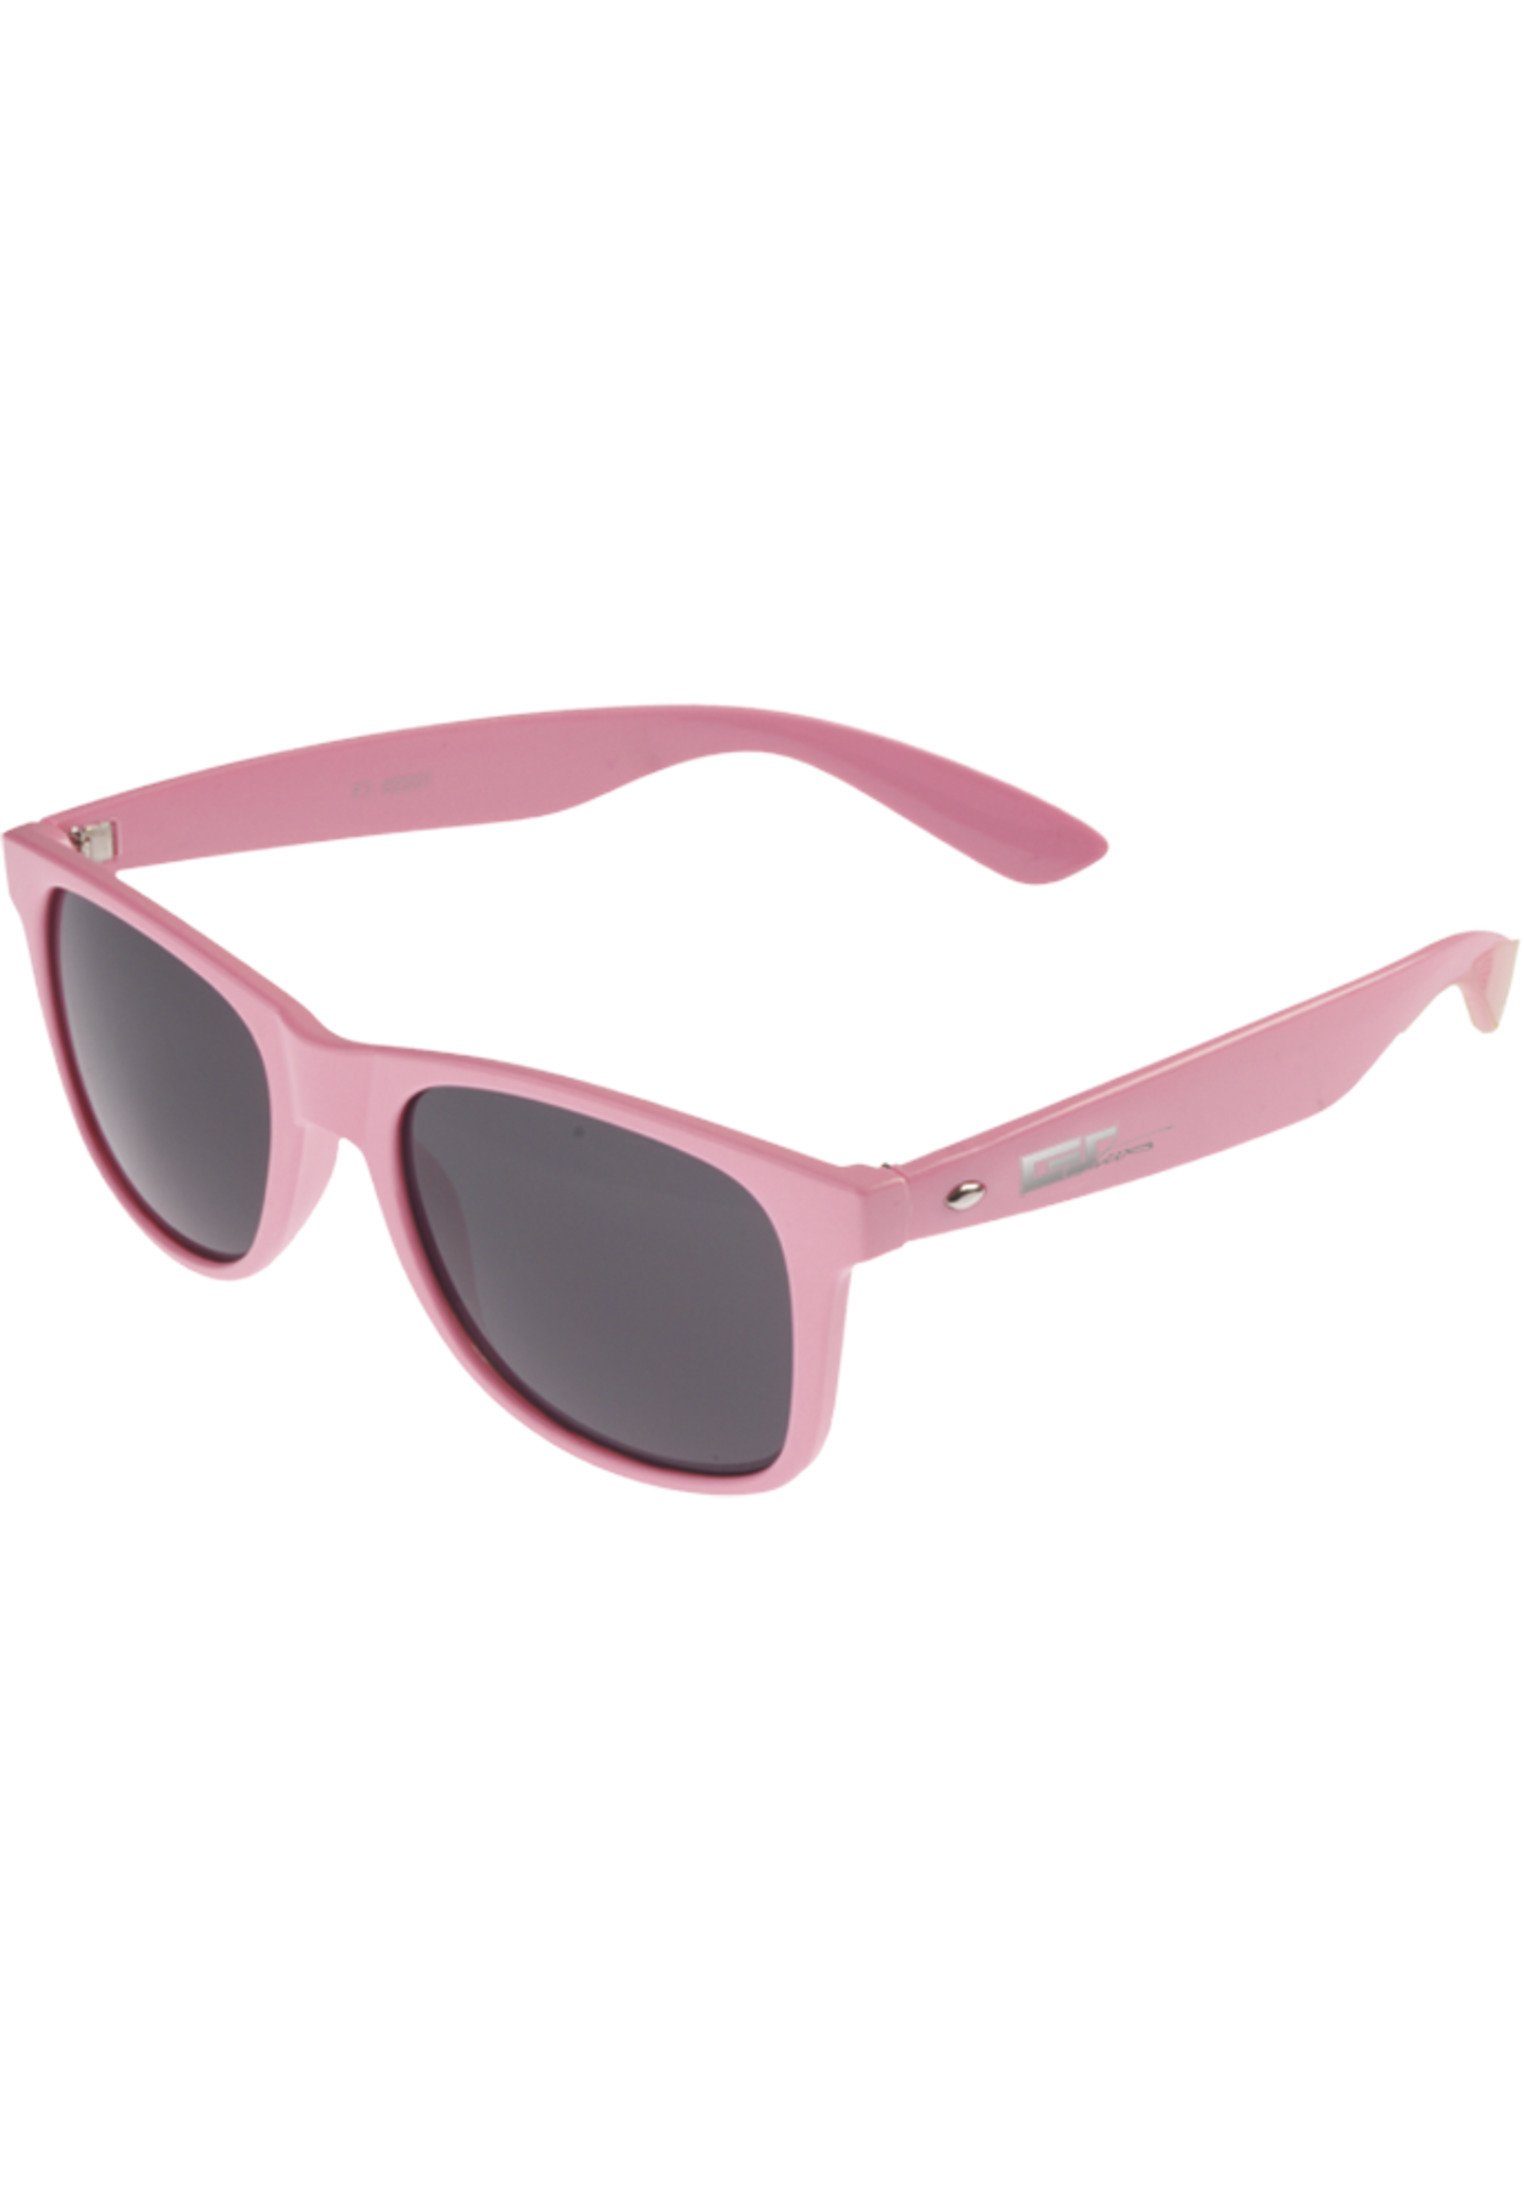 Accessoires MSTRDS Groove Shades GStwo Sonnenbrille neonpink